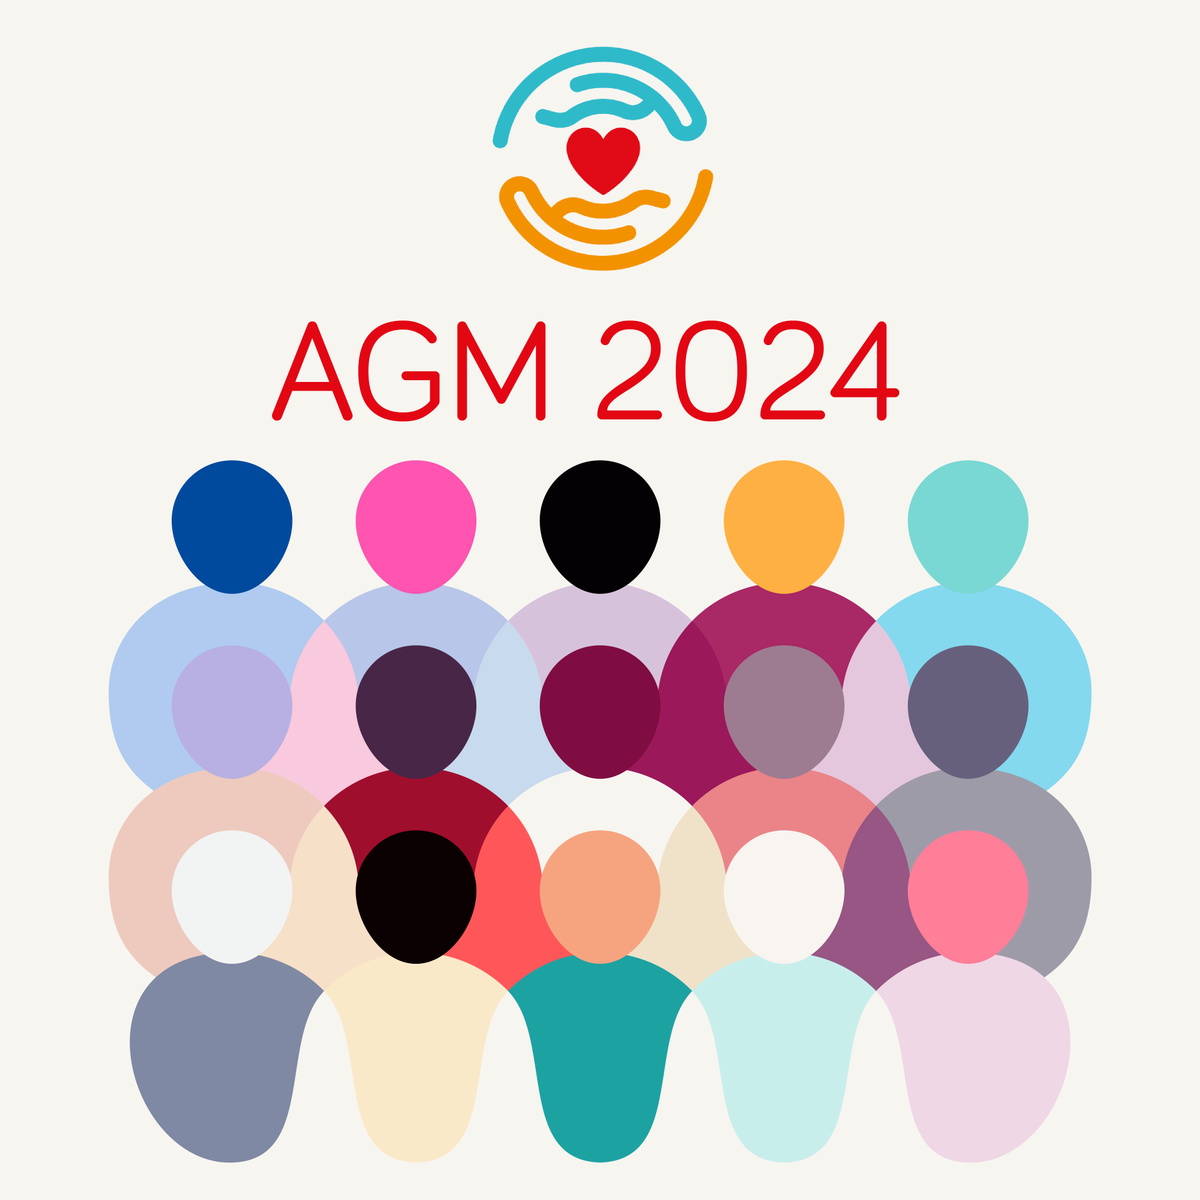 This is a reminder that our AGM is scheduled for Wednesday, 31st January, from 09.30 am to 12.00 pm at St Helier Parish Hall with tea/coffee/pastries provided. JCF Members have been emailed a copy of the agenda and also links to registration and nomination forms.